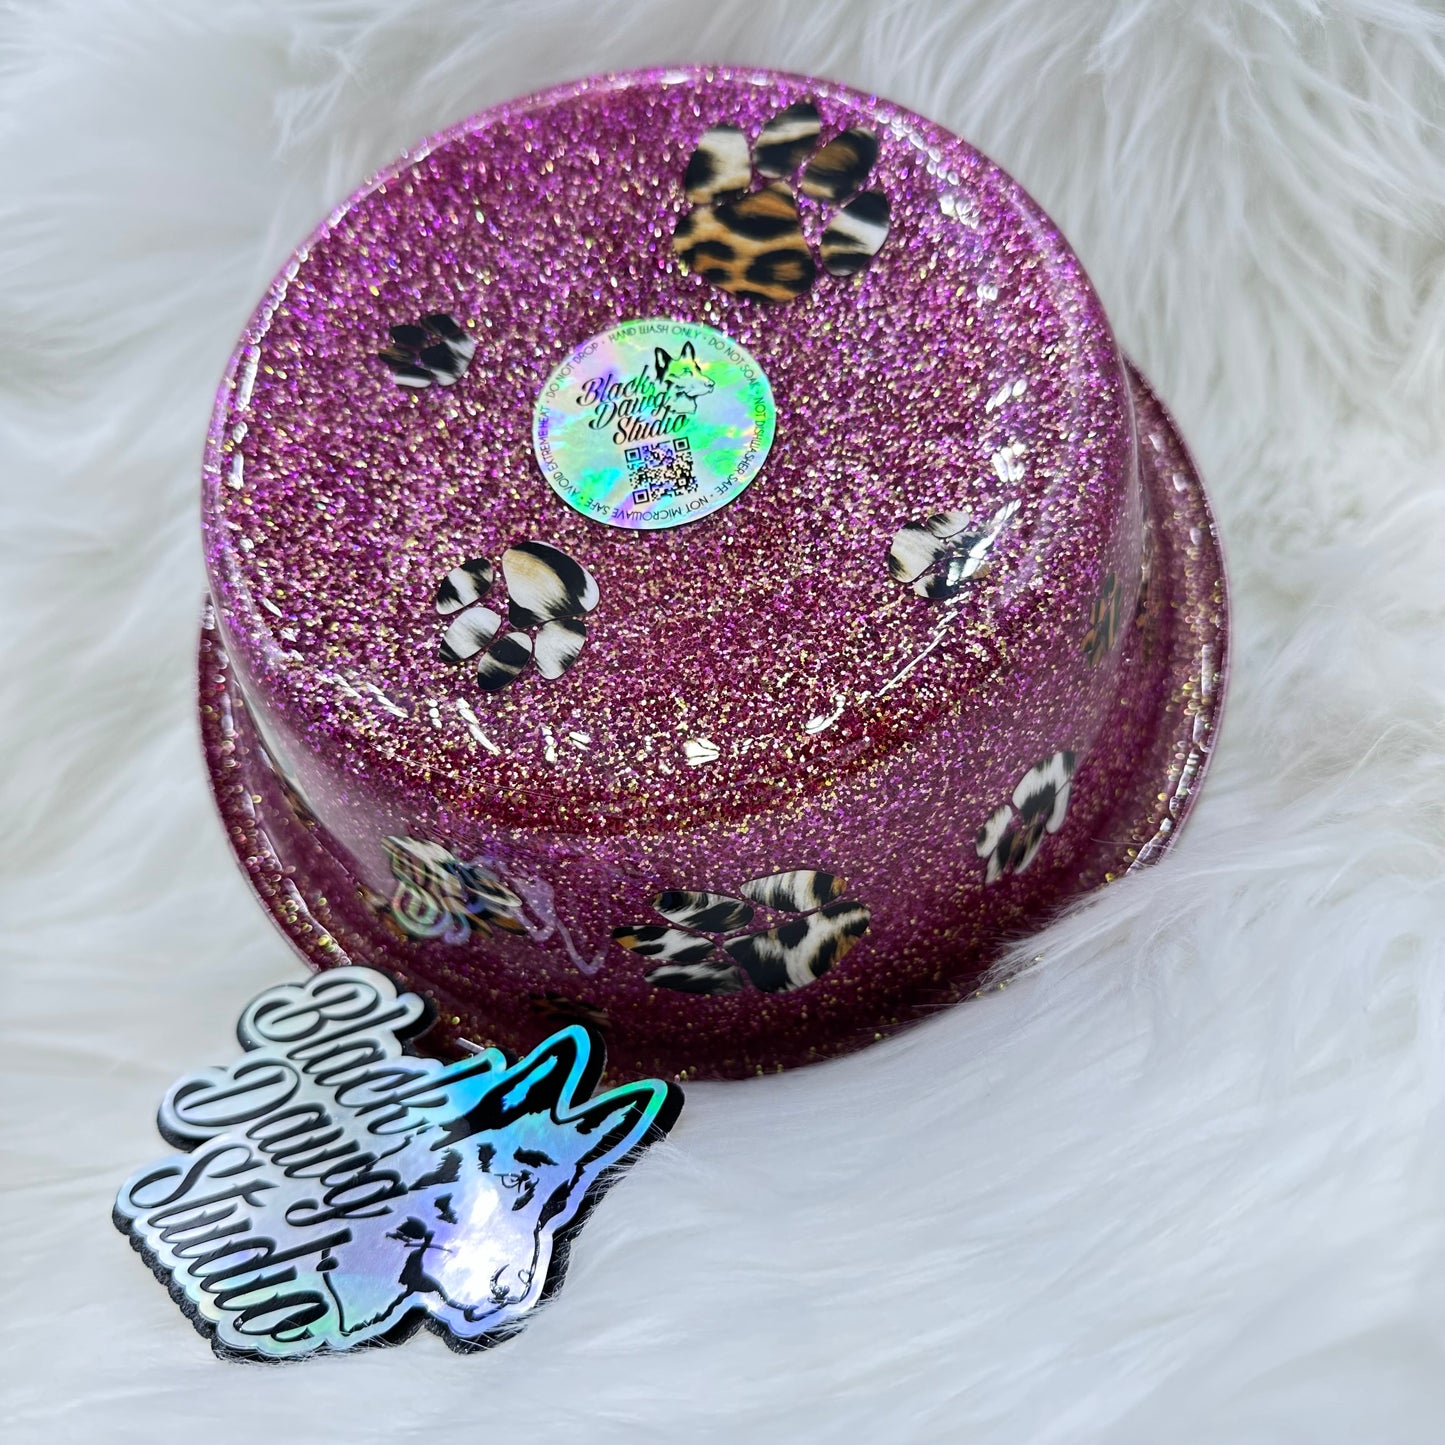 8-inch Dog Bowl - Color Shift Glitter and Animal Print Paw Prints - Epoxy Tumbler for Dogs